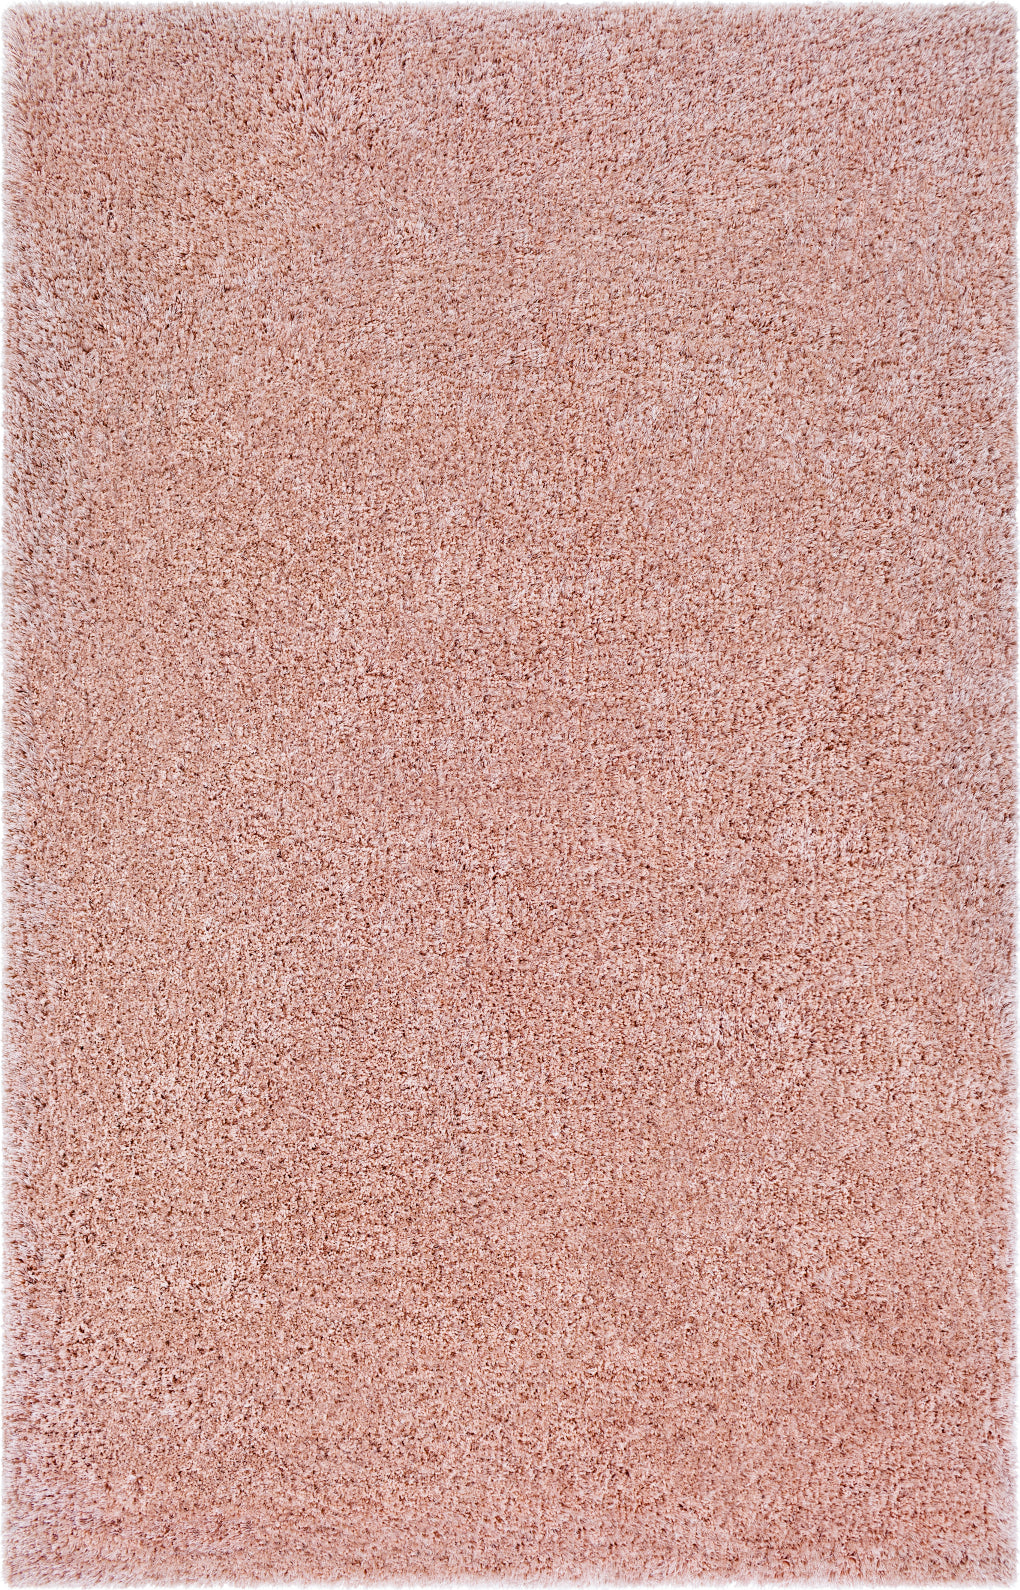 Surya Grizzly Grizzly-13 Area Rug main image